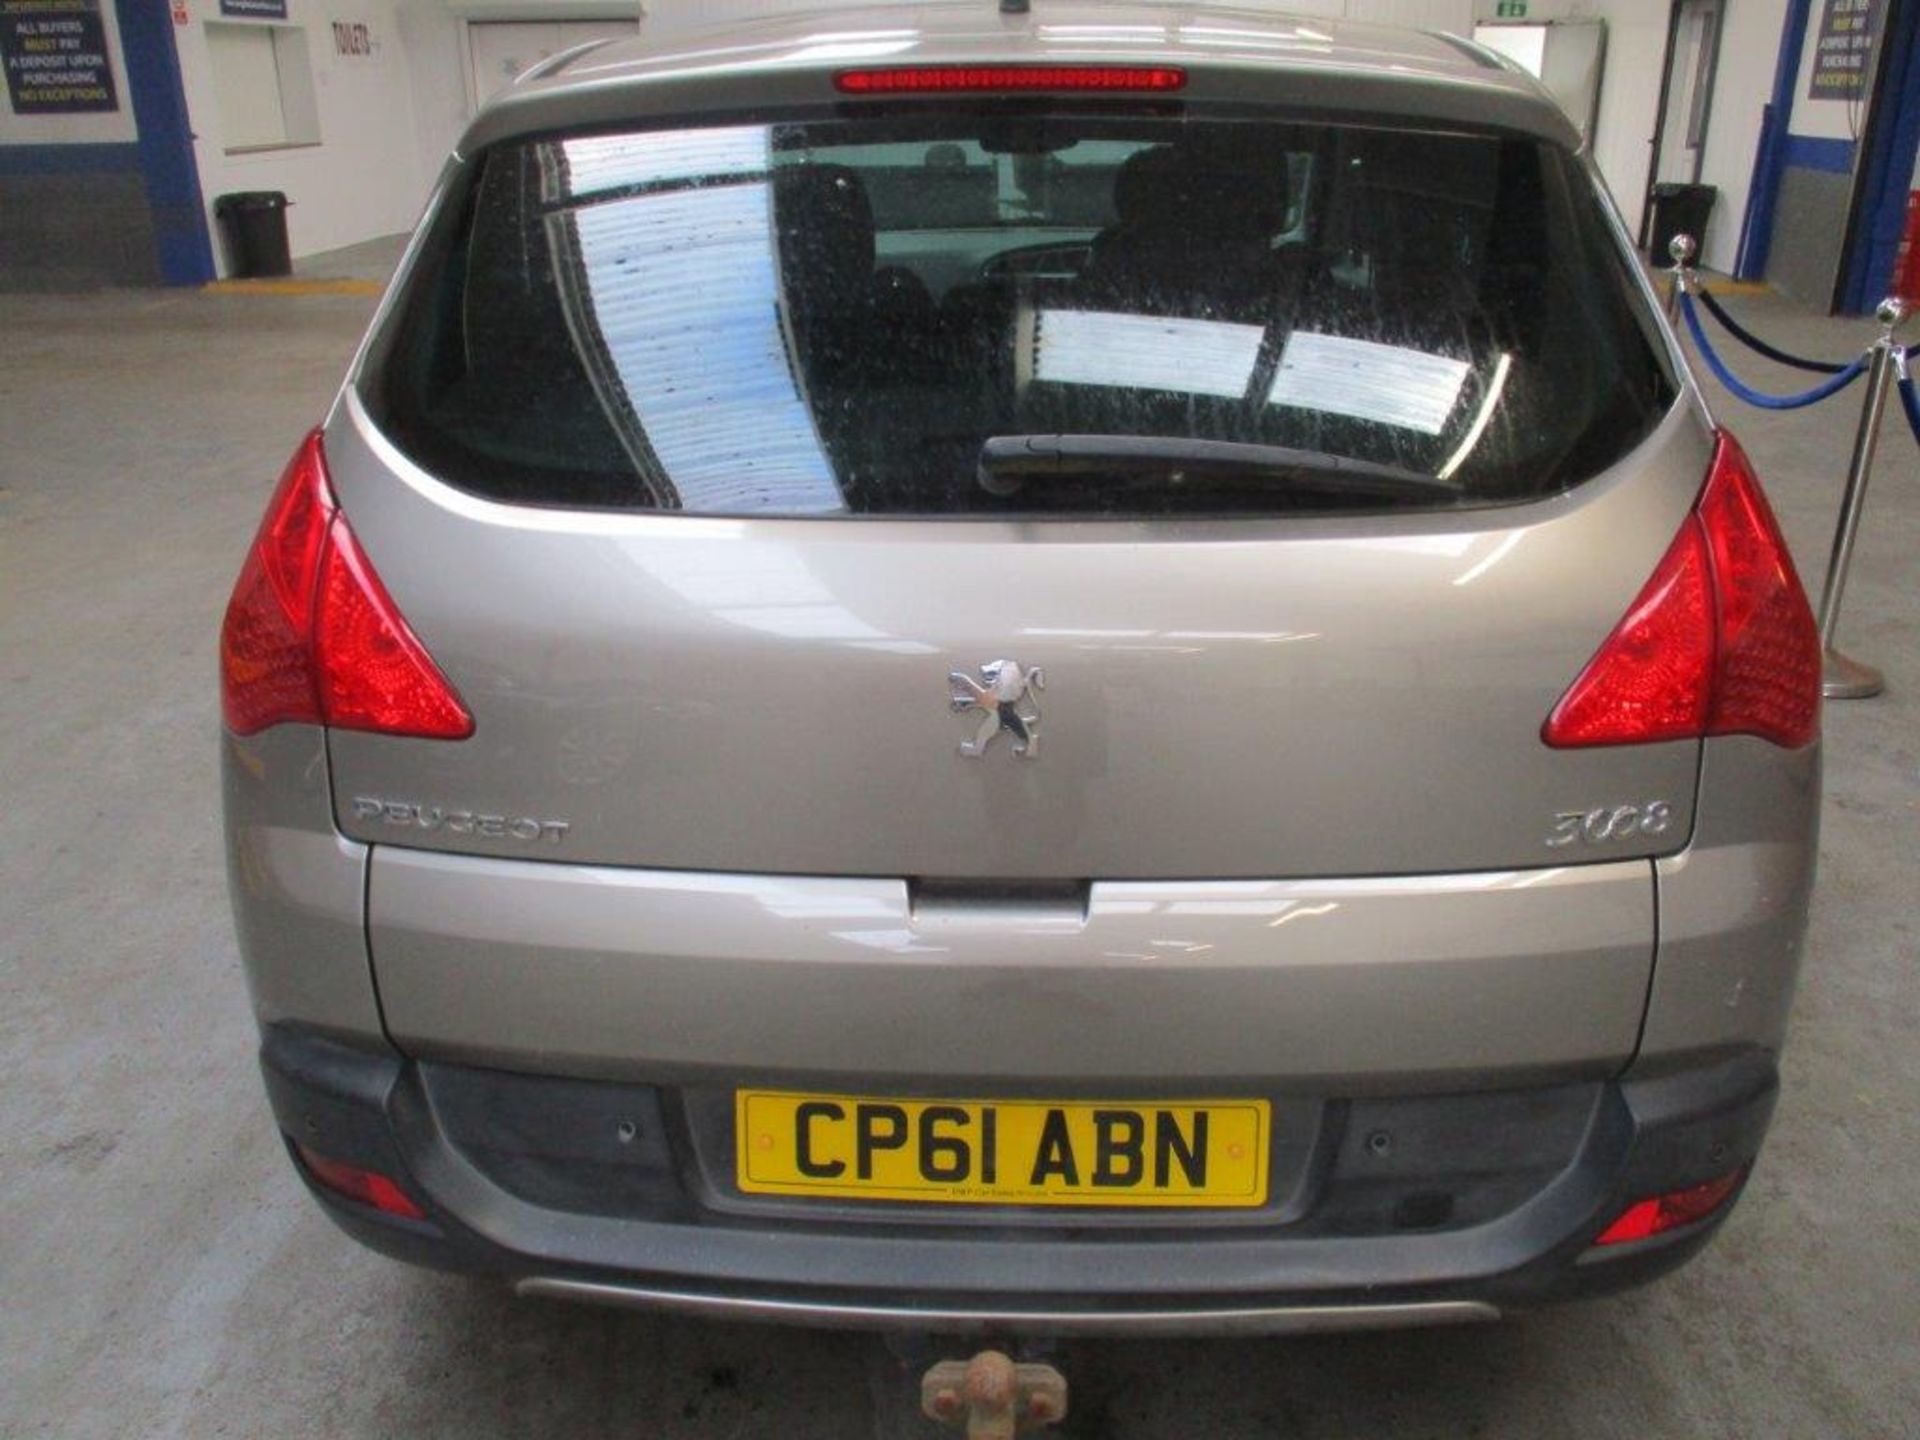 61 11 Peugeot 3008 Exclusive HDI - Image 4 of 24